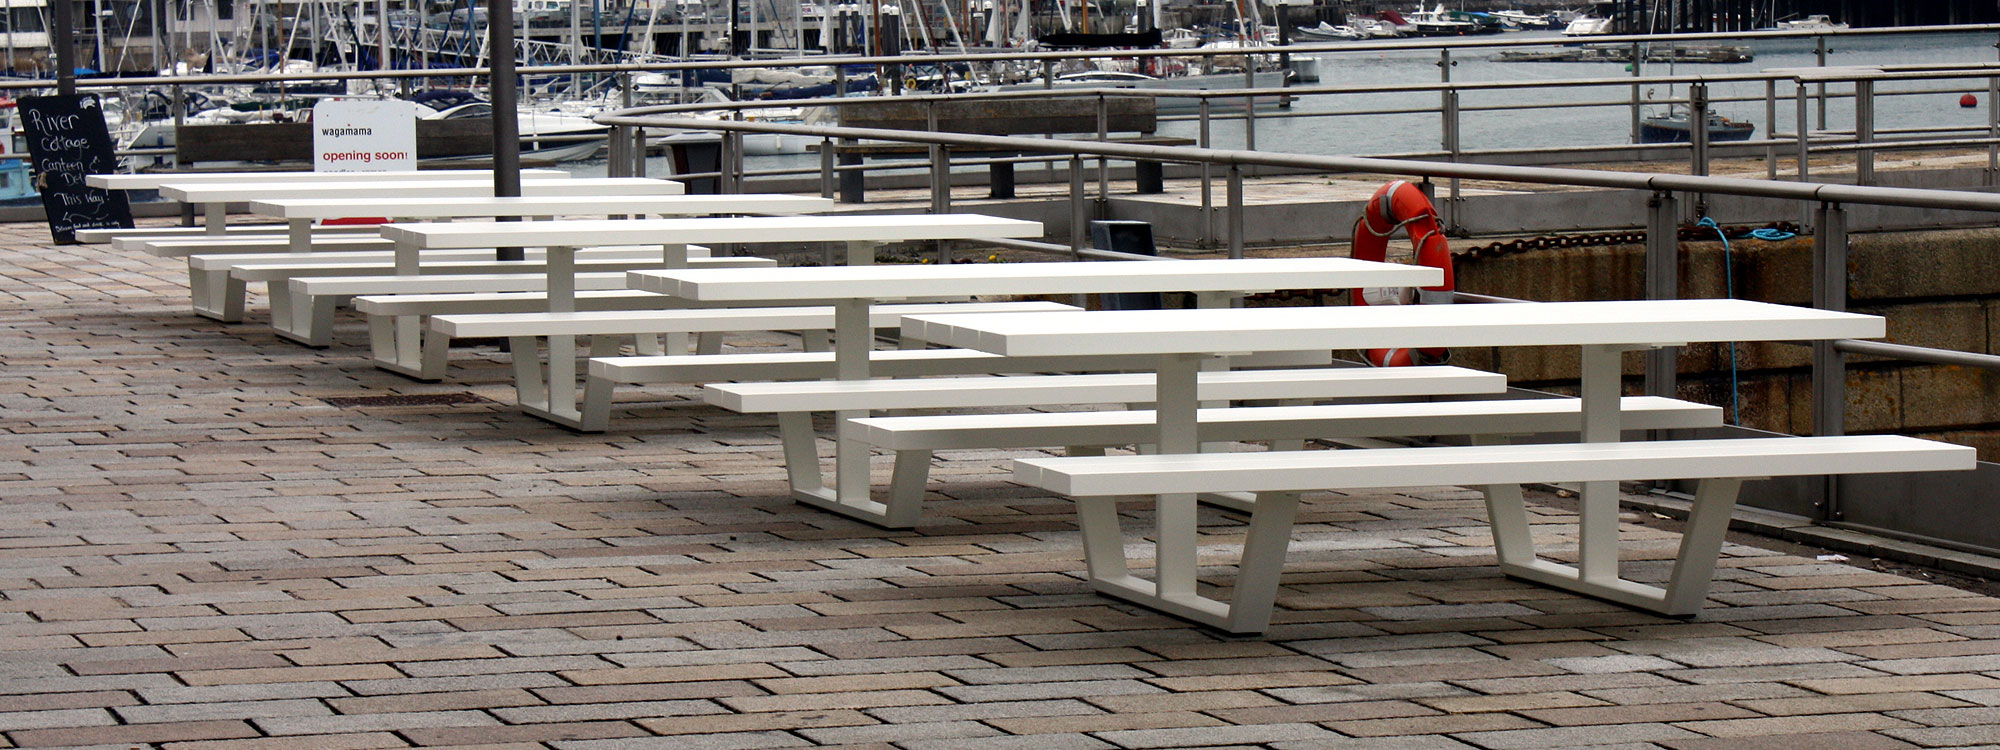 Image of Cassecroute hospitality picnic tables outside Wagamana restaurant, Plymouth historic dockyard